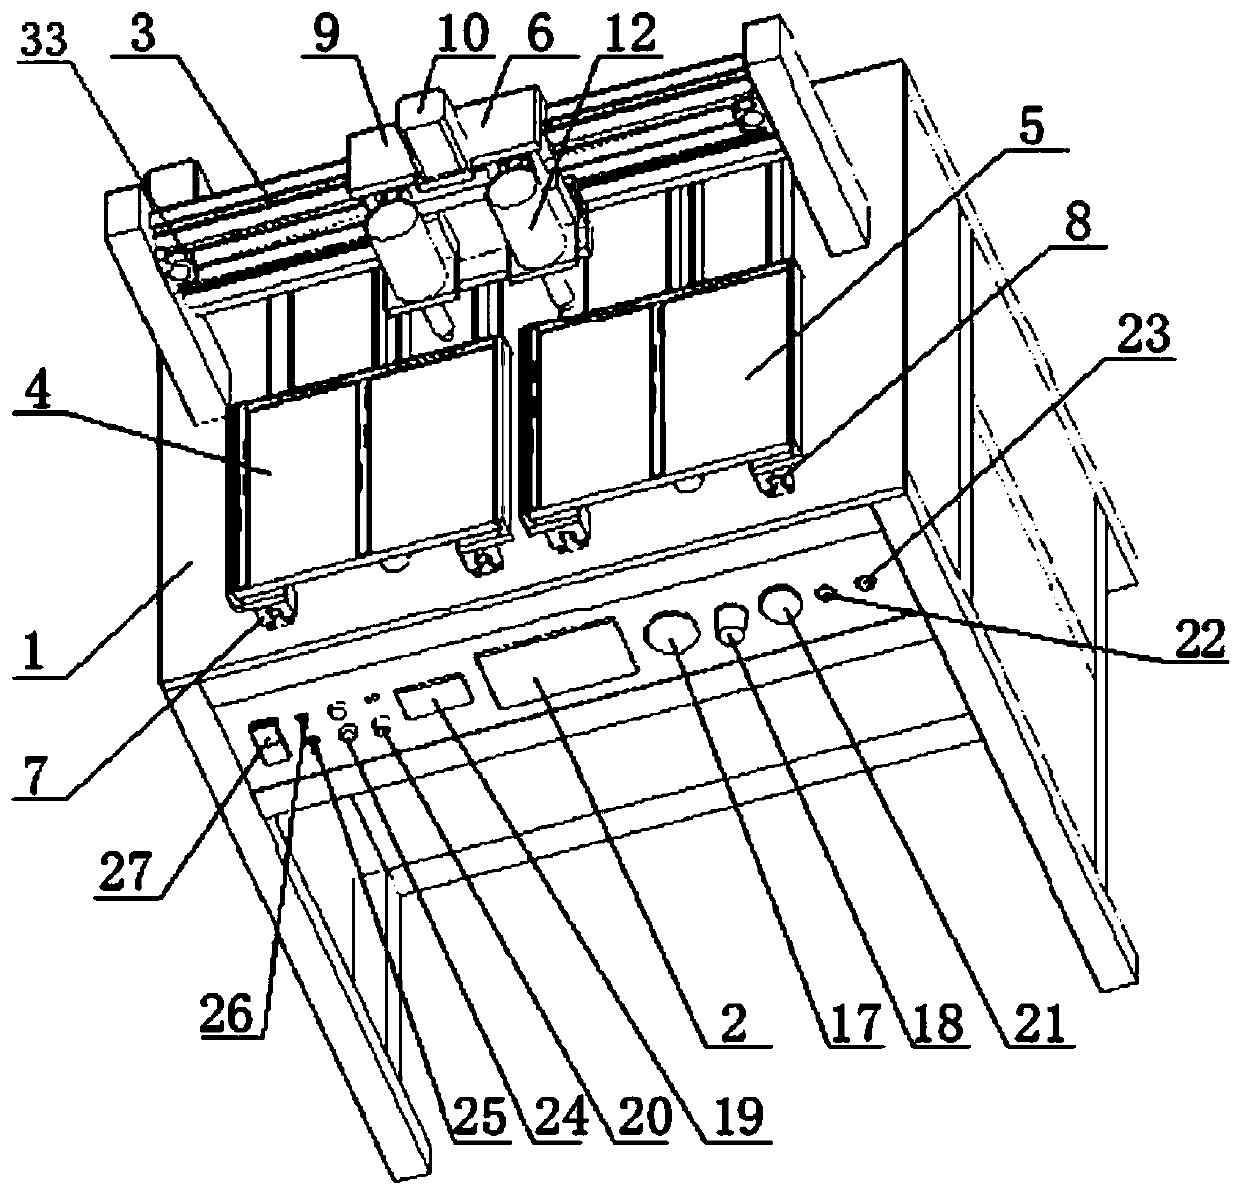 A fully automatic double-table wiping machine